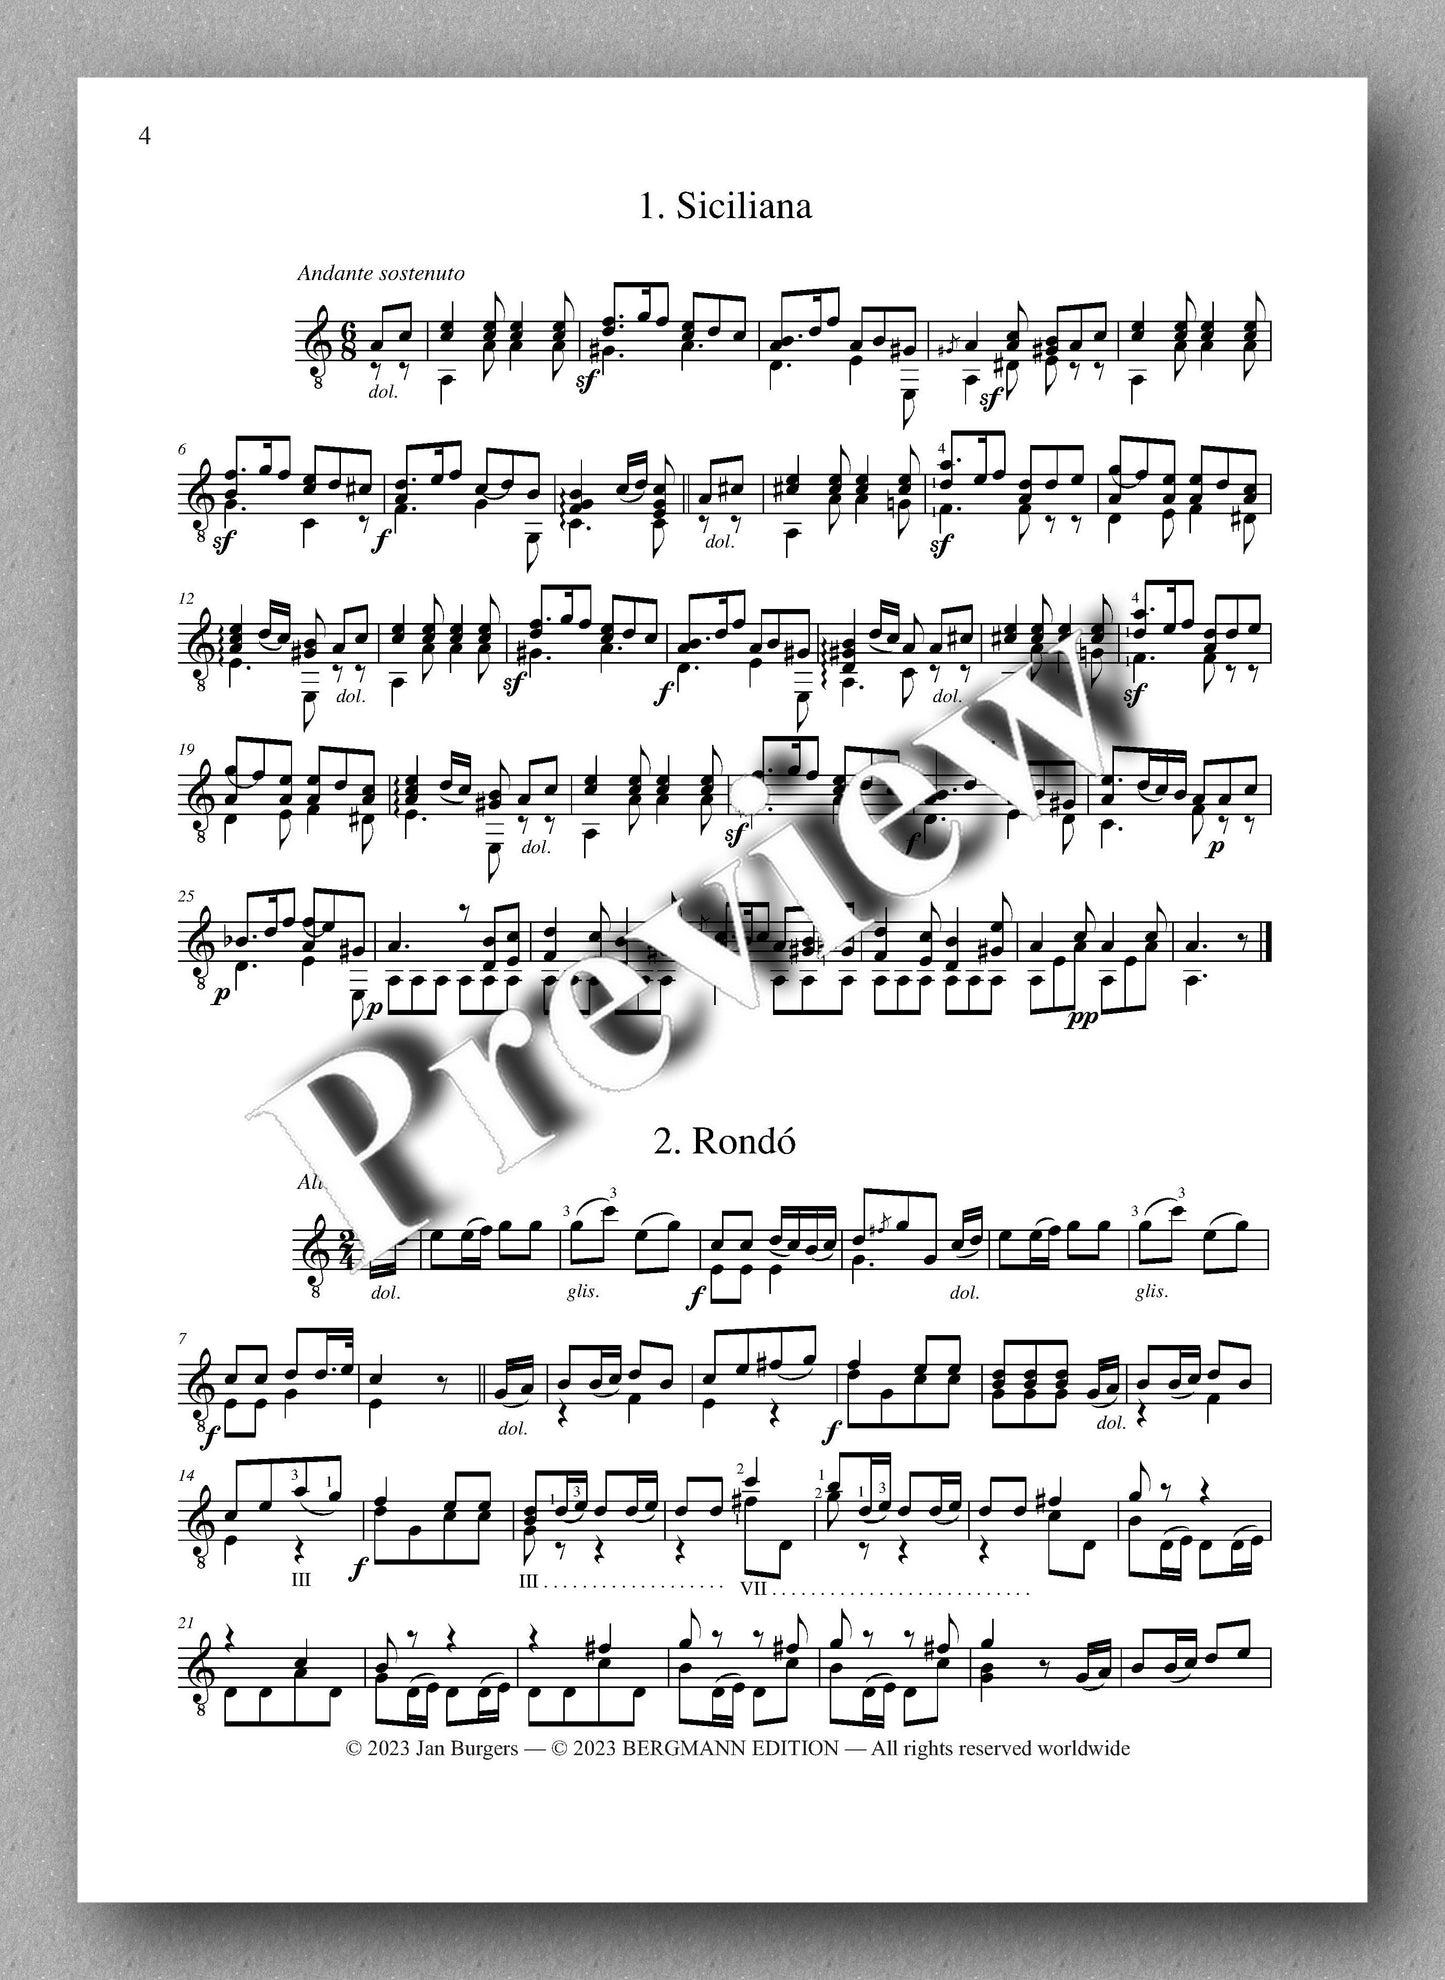 Molino, Collected Works for Guitar Solo, Vol. 17 - preview of the music score 1